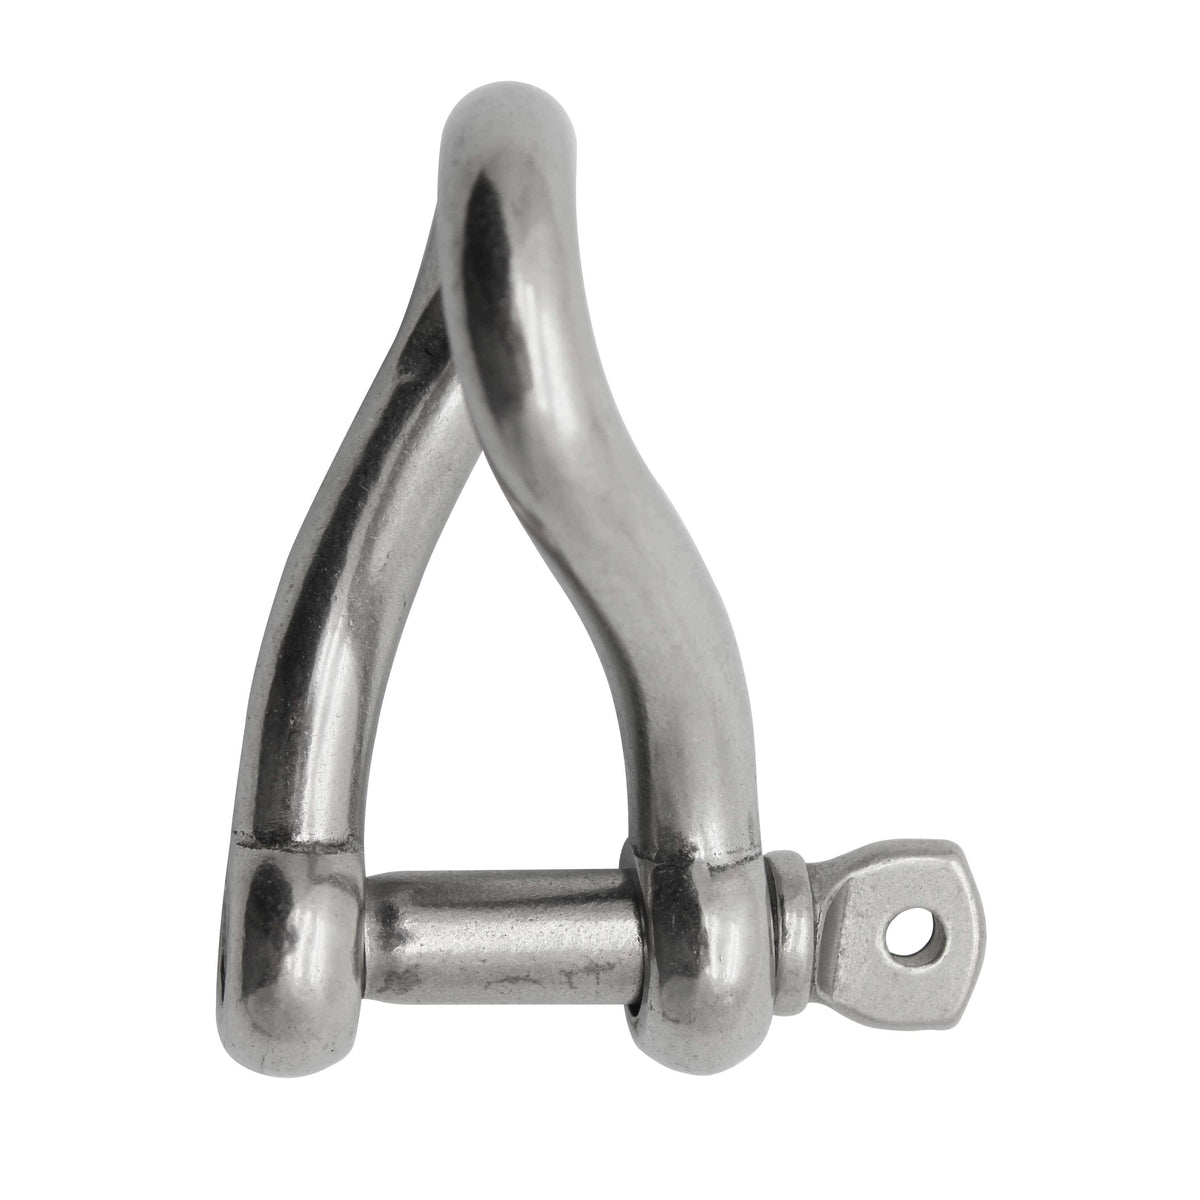 Extreme Max BoatTector SS Twist Shackle 1/4" #3006.8213